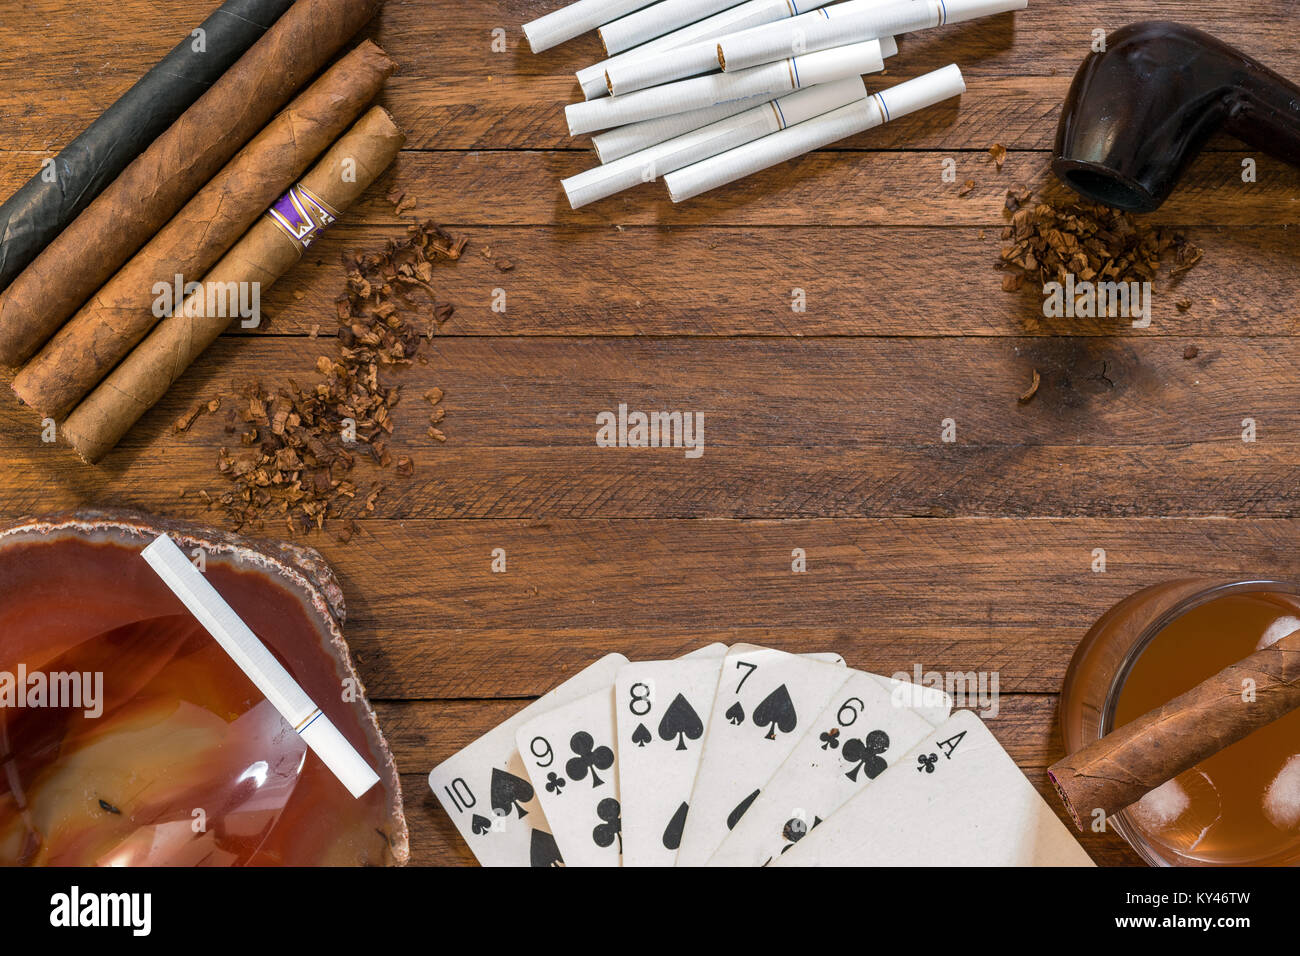 Smoking and tobacco products, cigars, cigarettes and a pipe with tobacco, on top of a wooden background, with playing cards, ashtray and drink Stock Photo